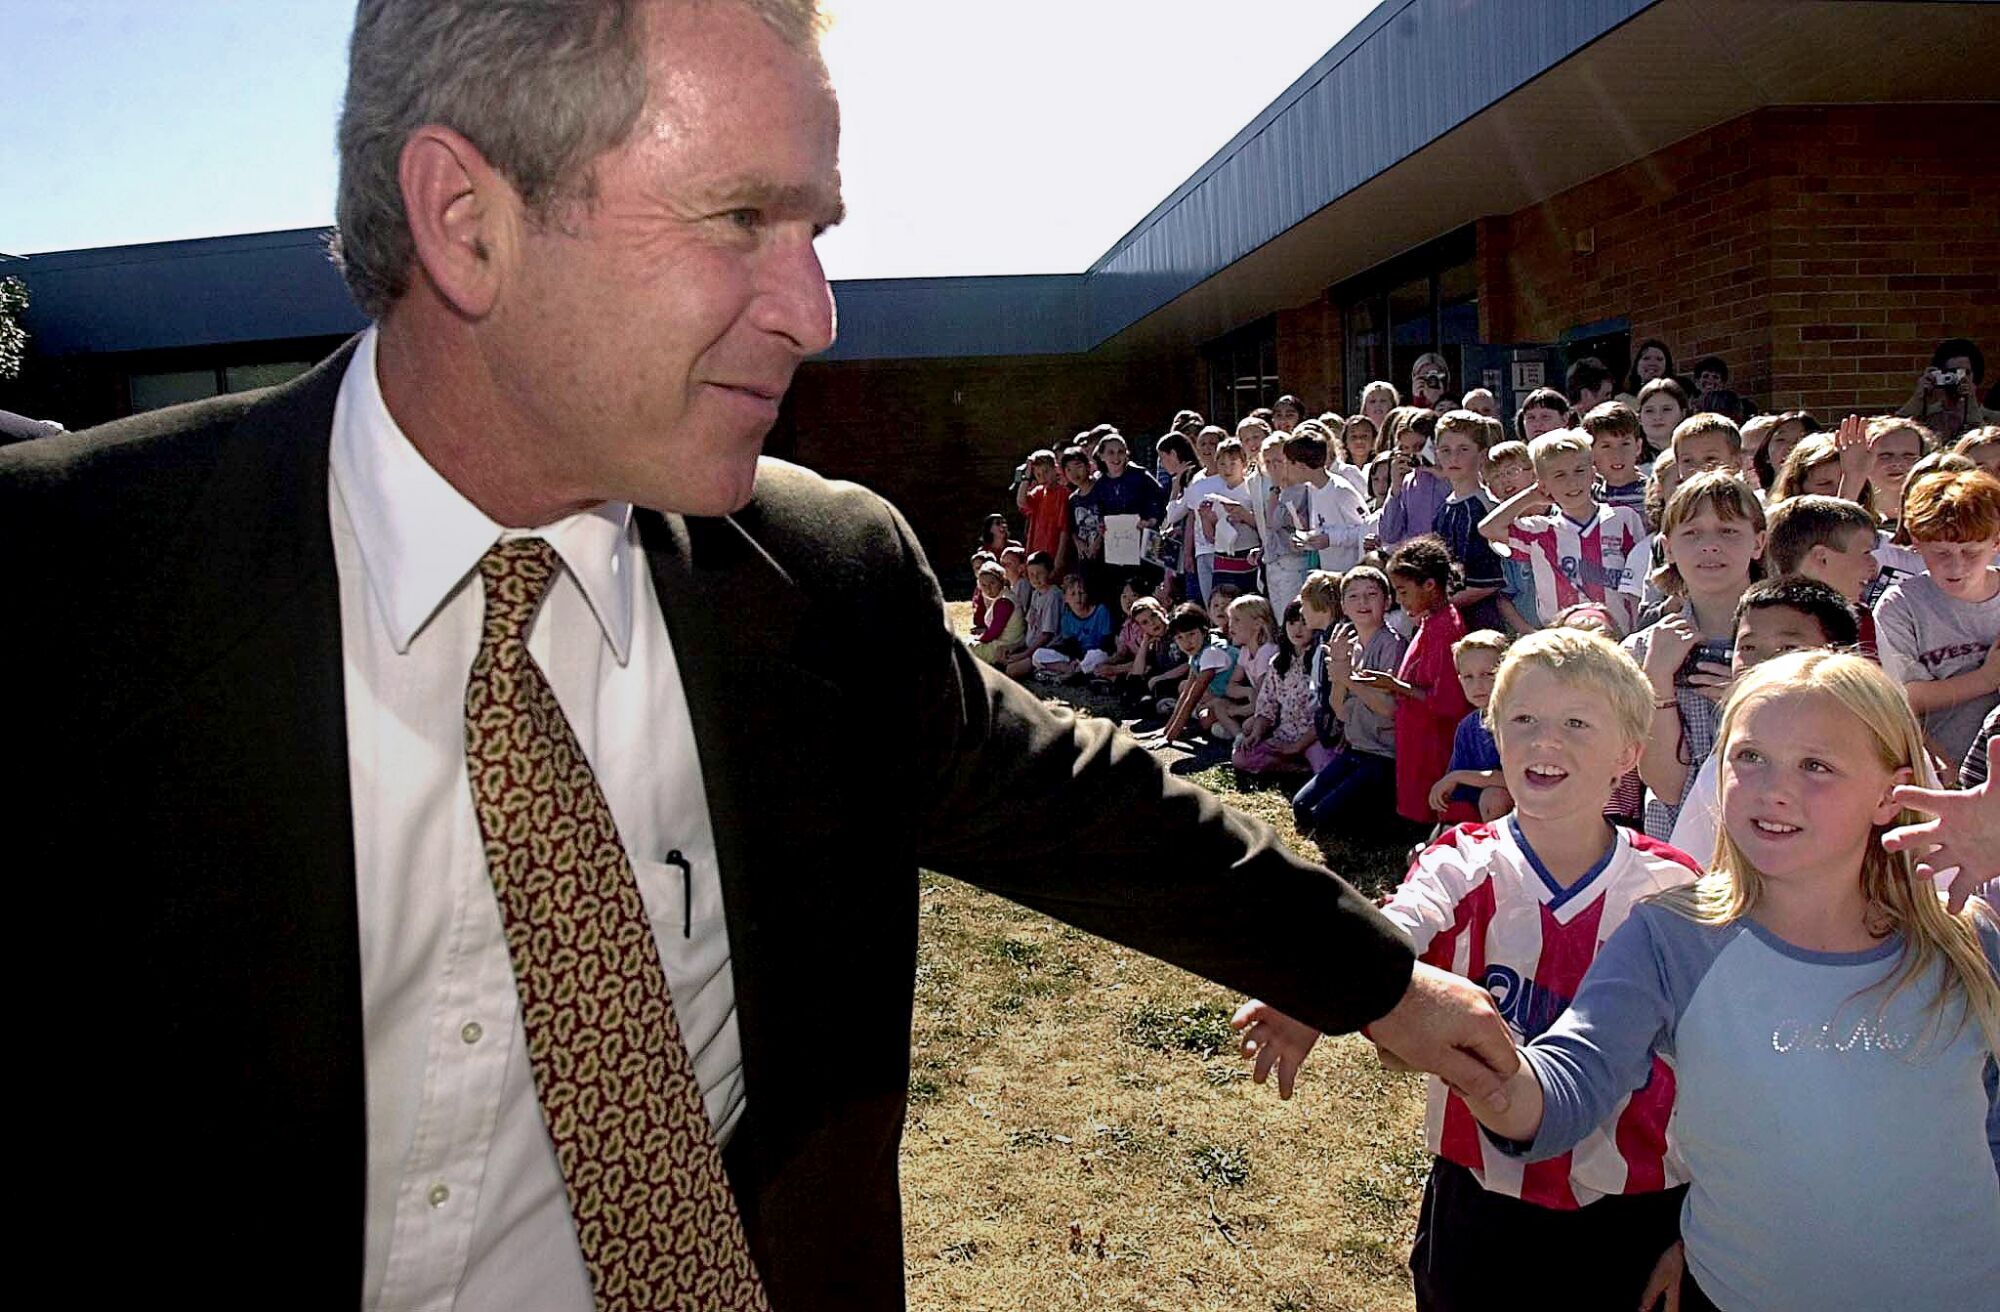 George W. Bush walking away from a crowd of children outdoors as some reach out to touch his hand.